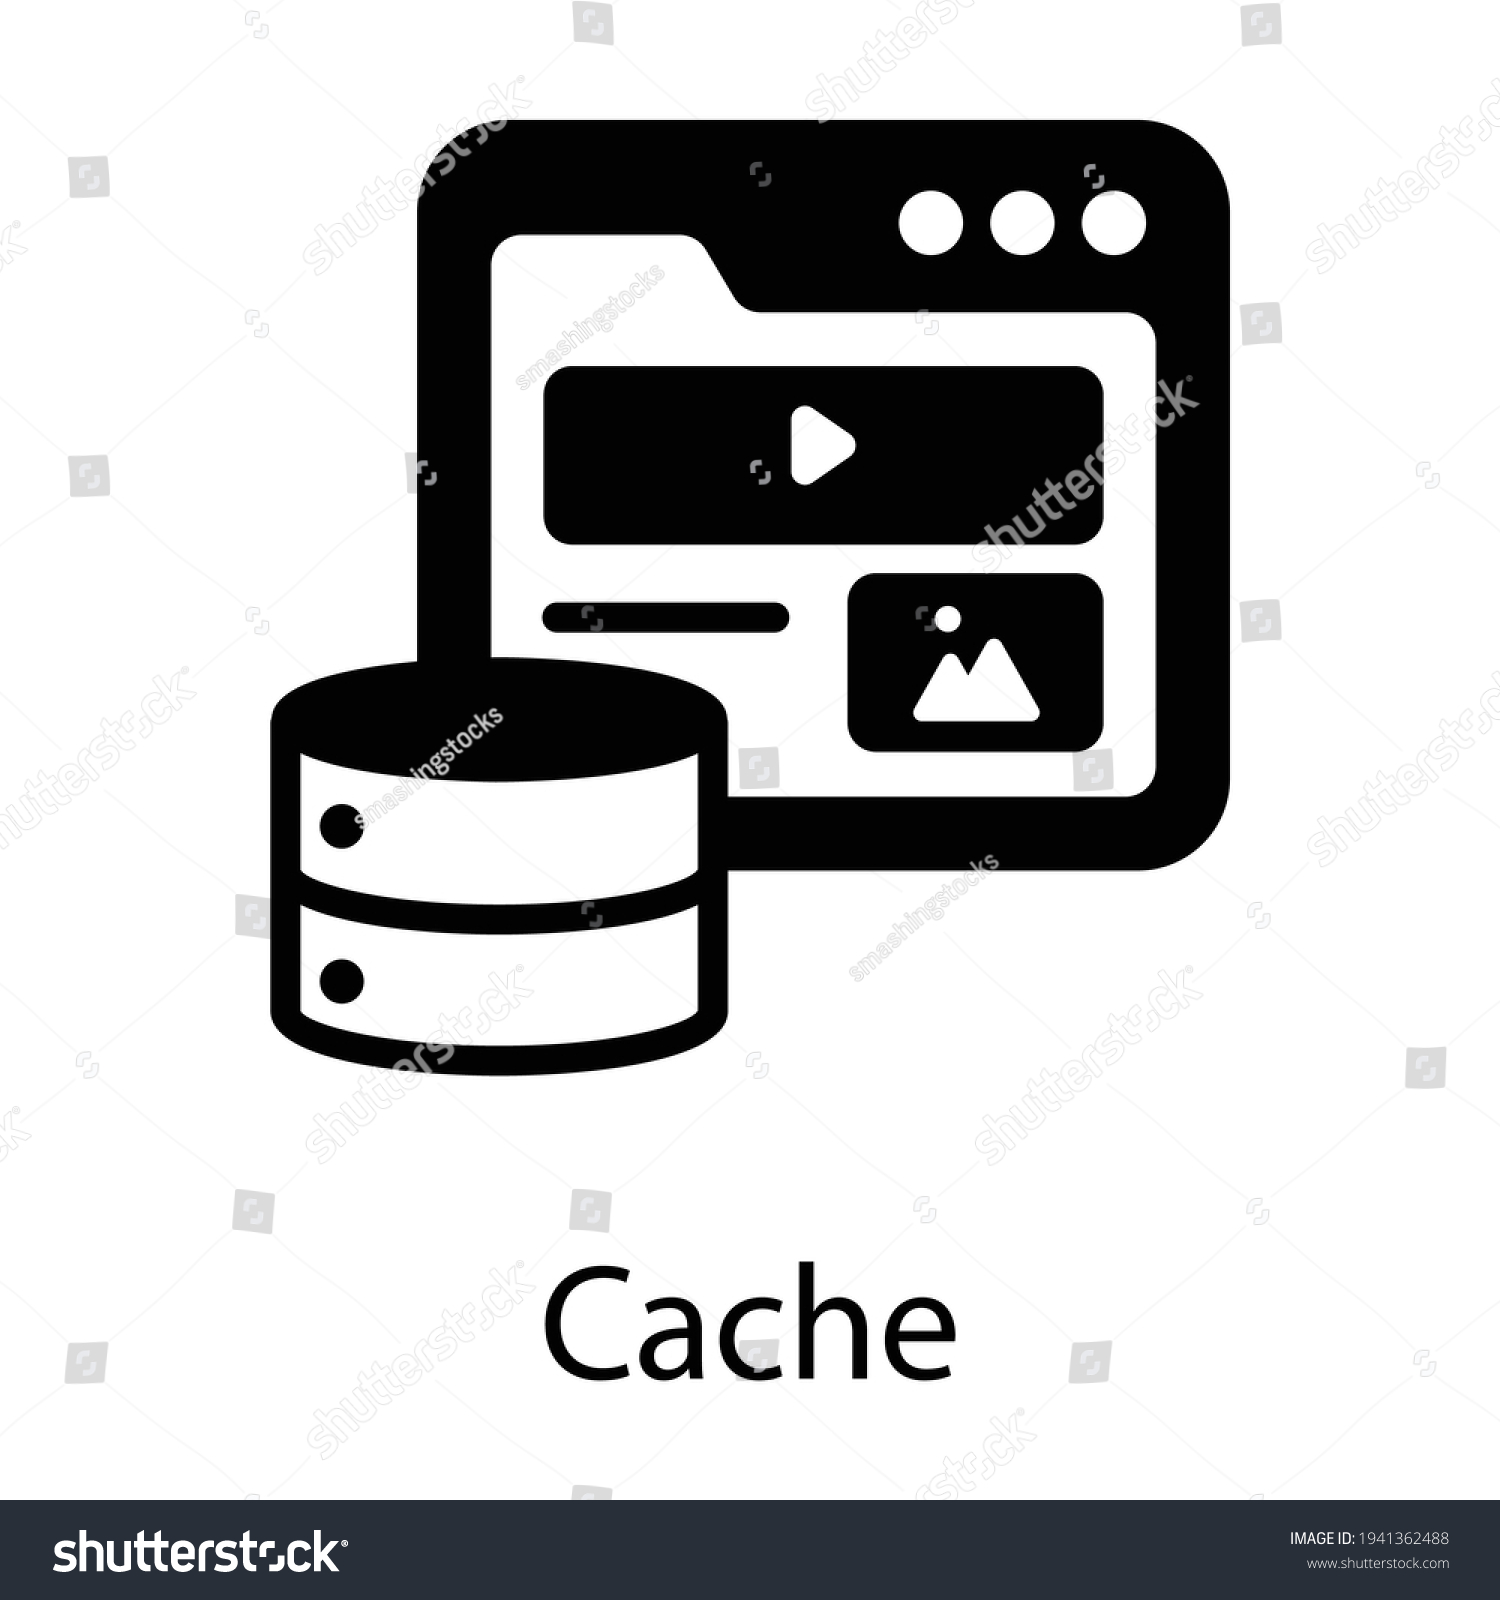 Cache Icon Images Stock Photos Vectors Shutterstock